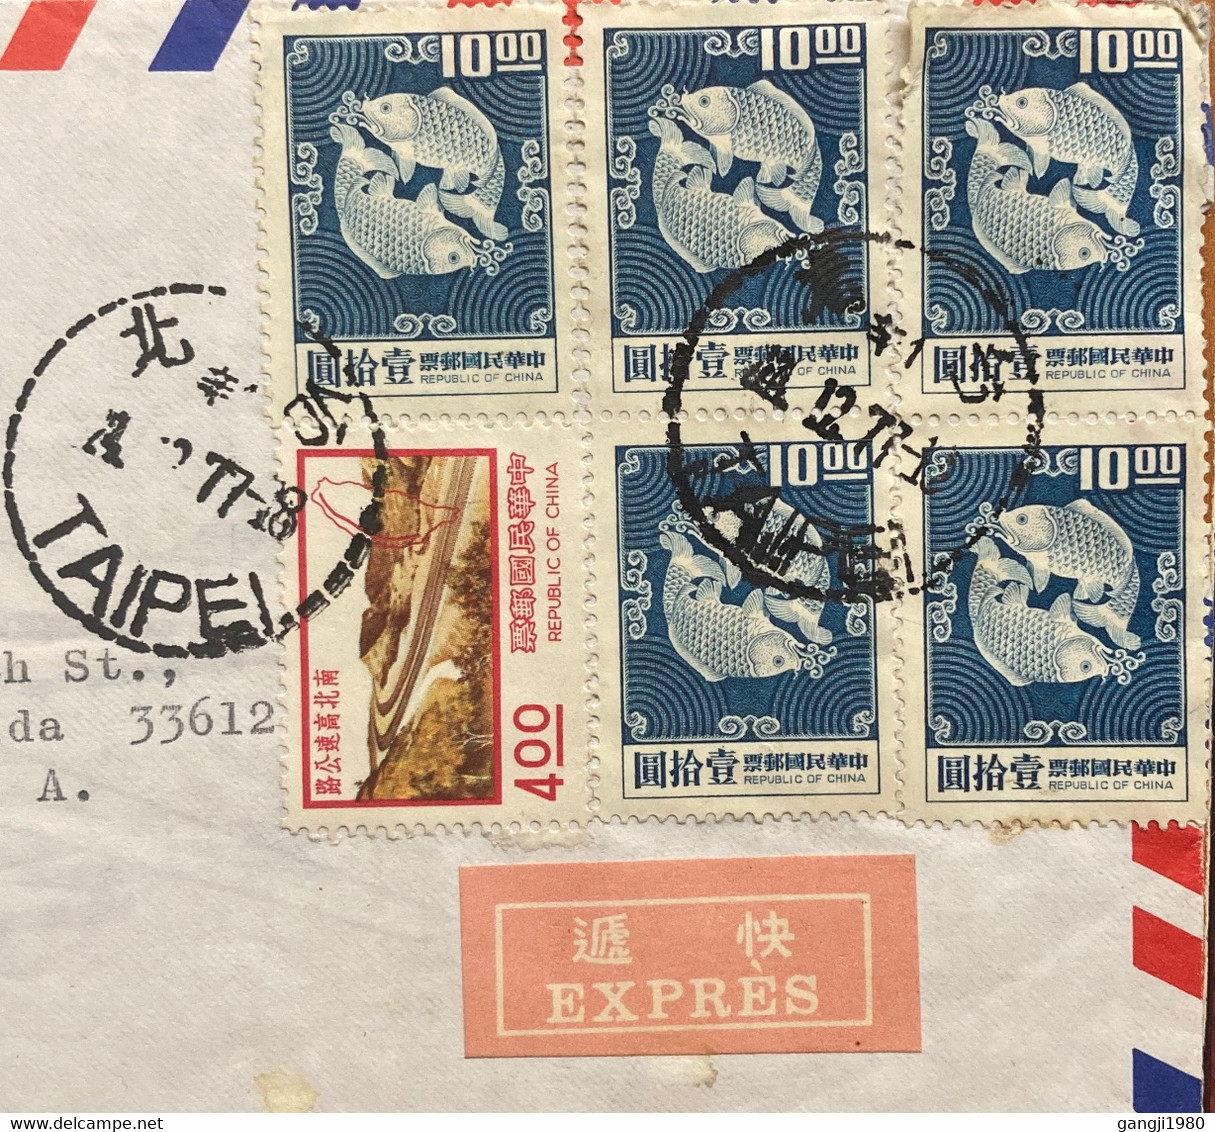 CHINA TAIWAN-1977, VIGNETTE “EXPRESS” LABEL USED COVER TO USA ,TUNG FOOK TRADING CO.ADVT PICTURE MATCHING FISH, SAME STA - Brieven En Documenten